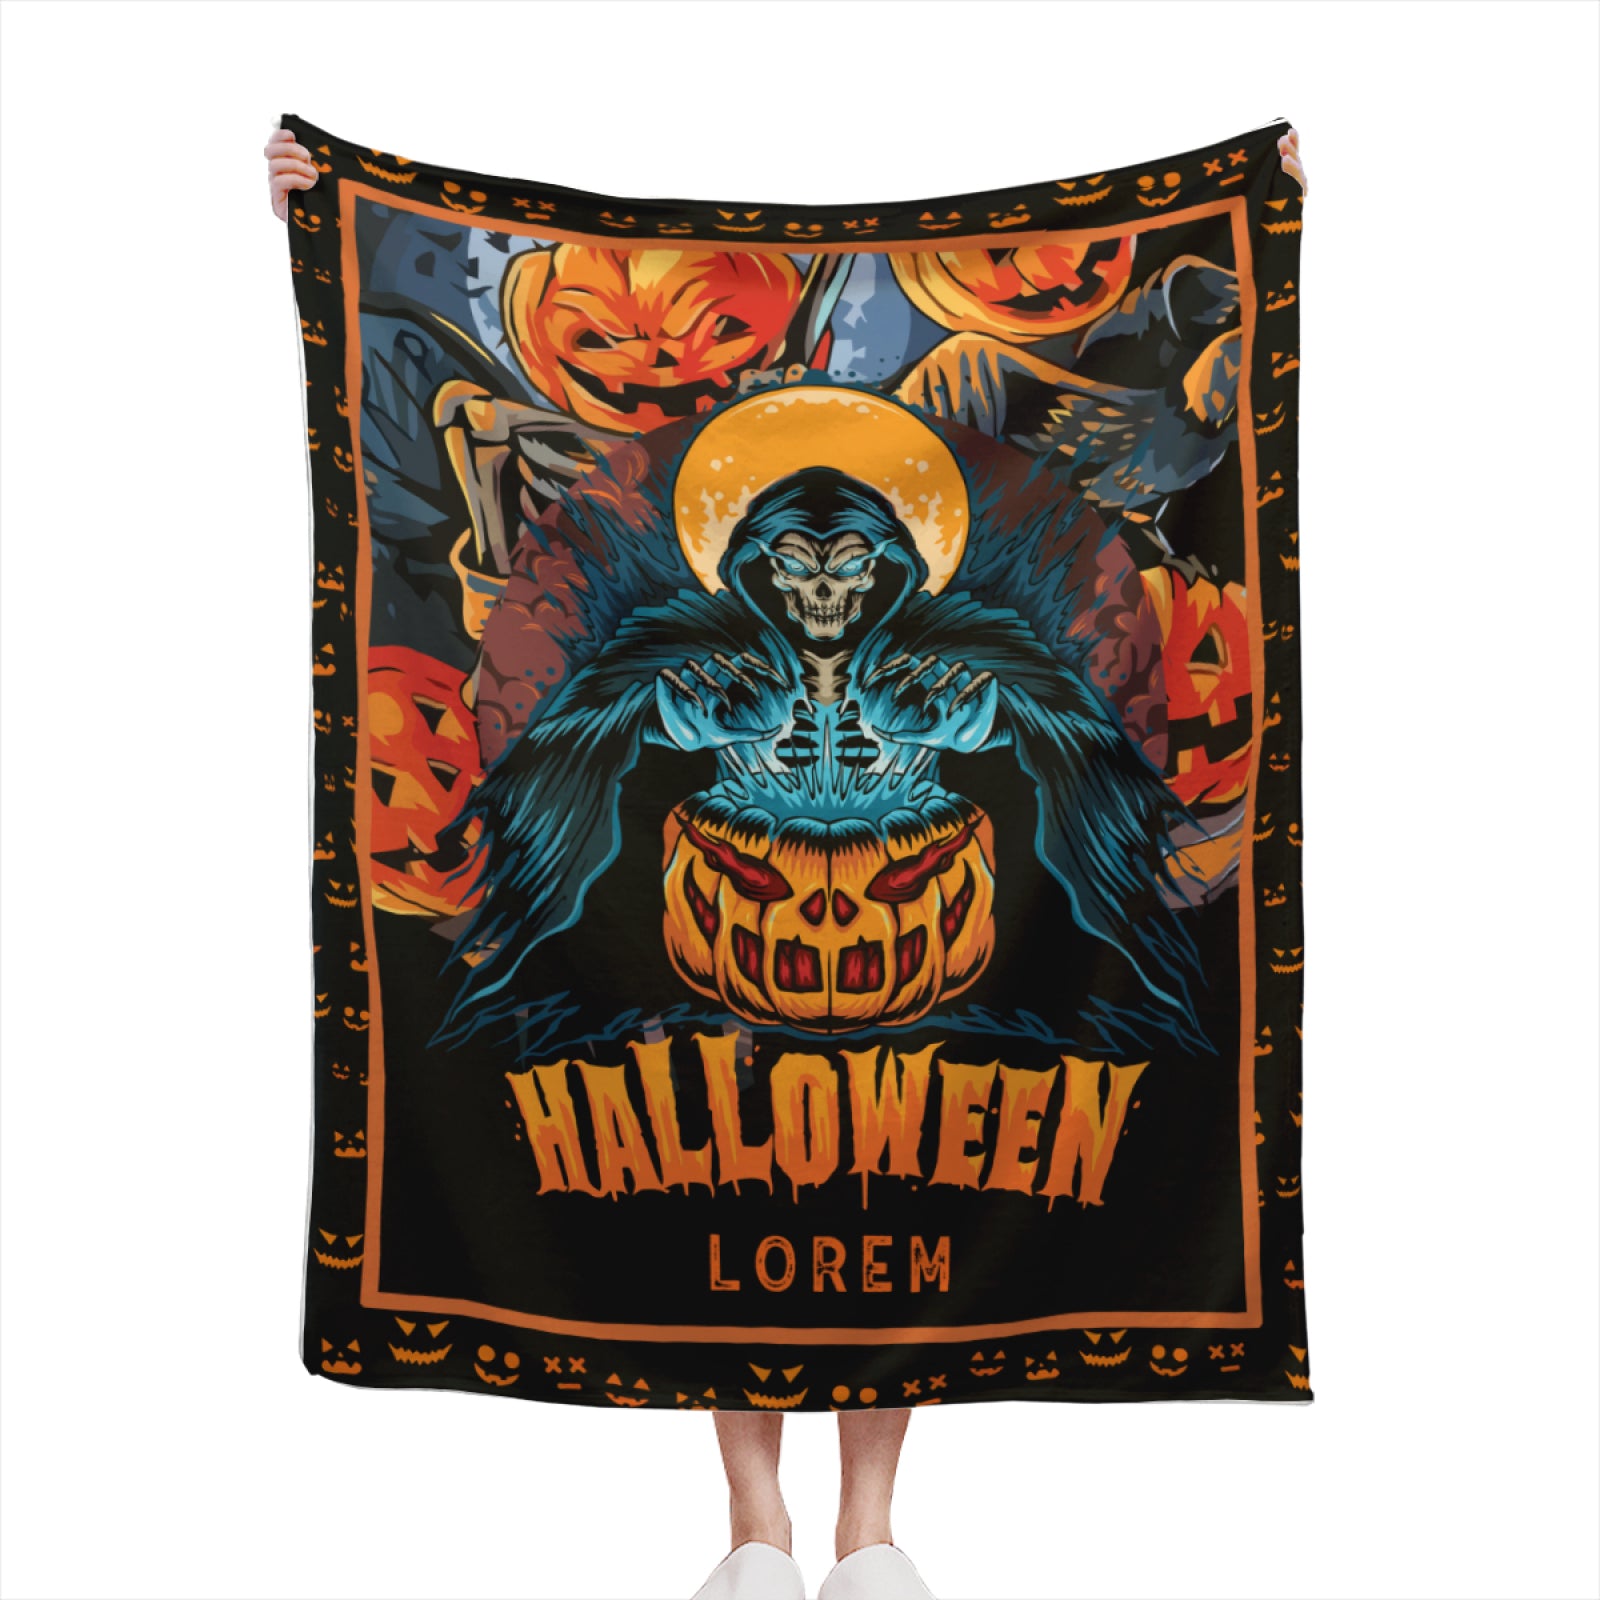 Scary Skull Halloween Blanket - Personalized Blanket with Name - Best Gifts for Family and Kids